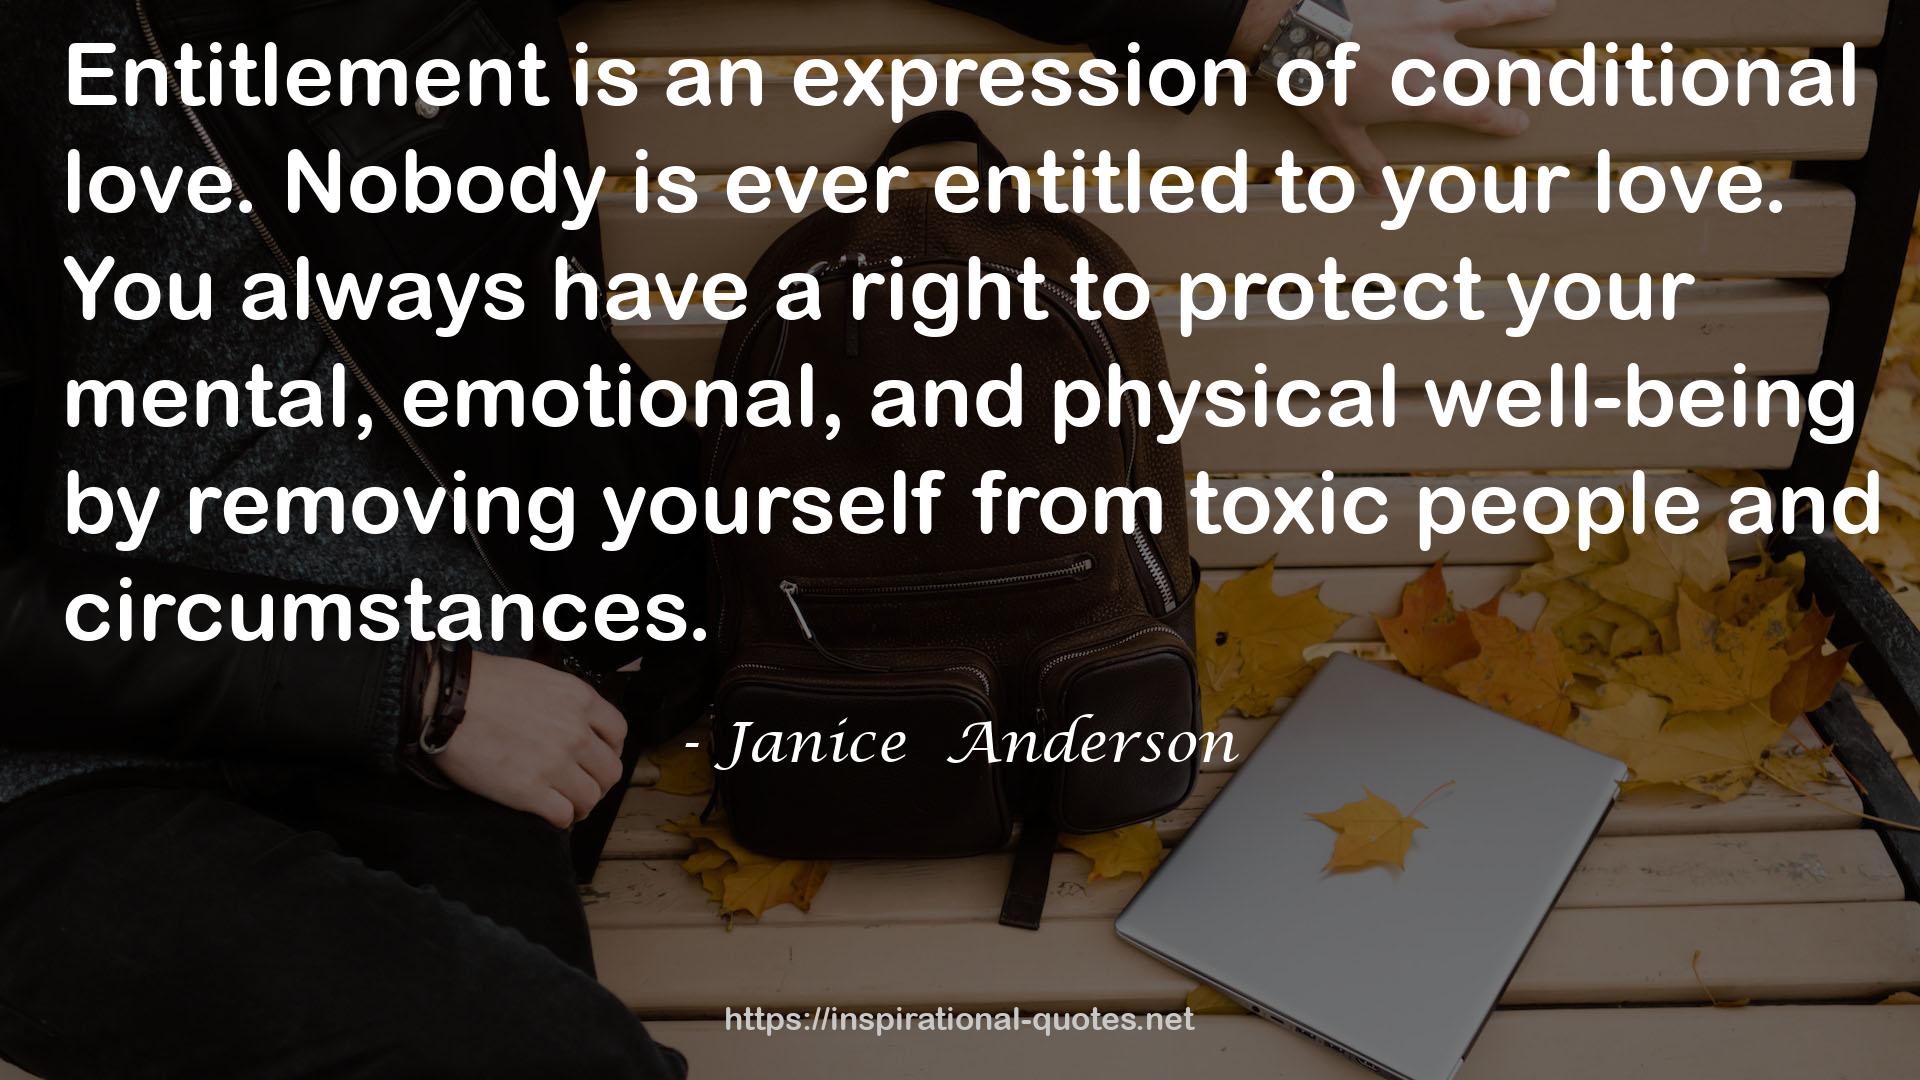 Janice  Anderson QUOTES